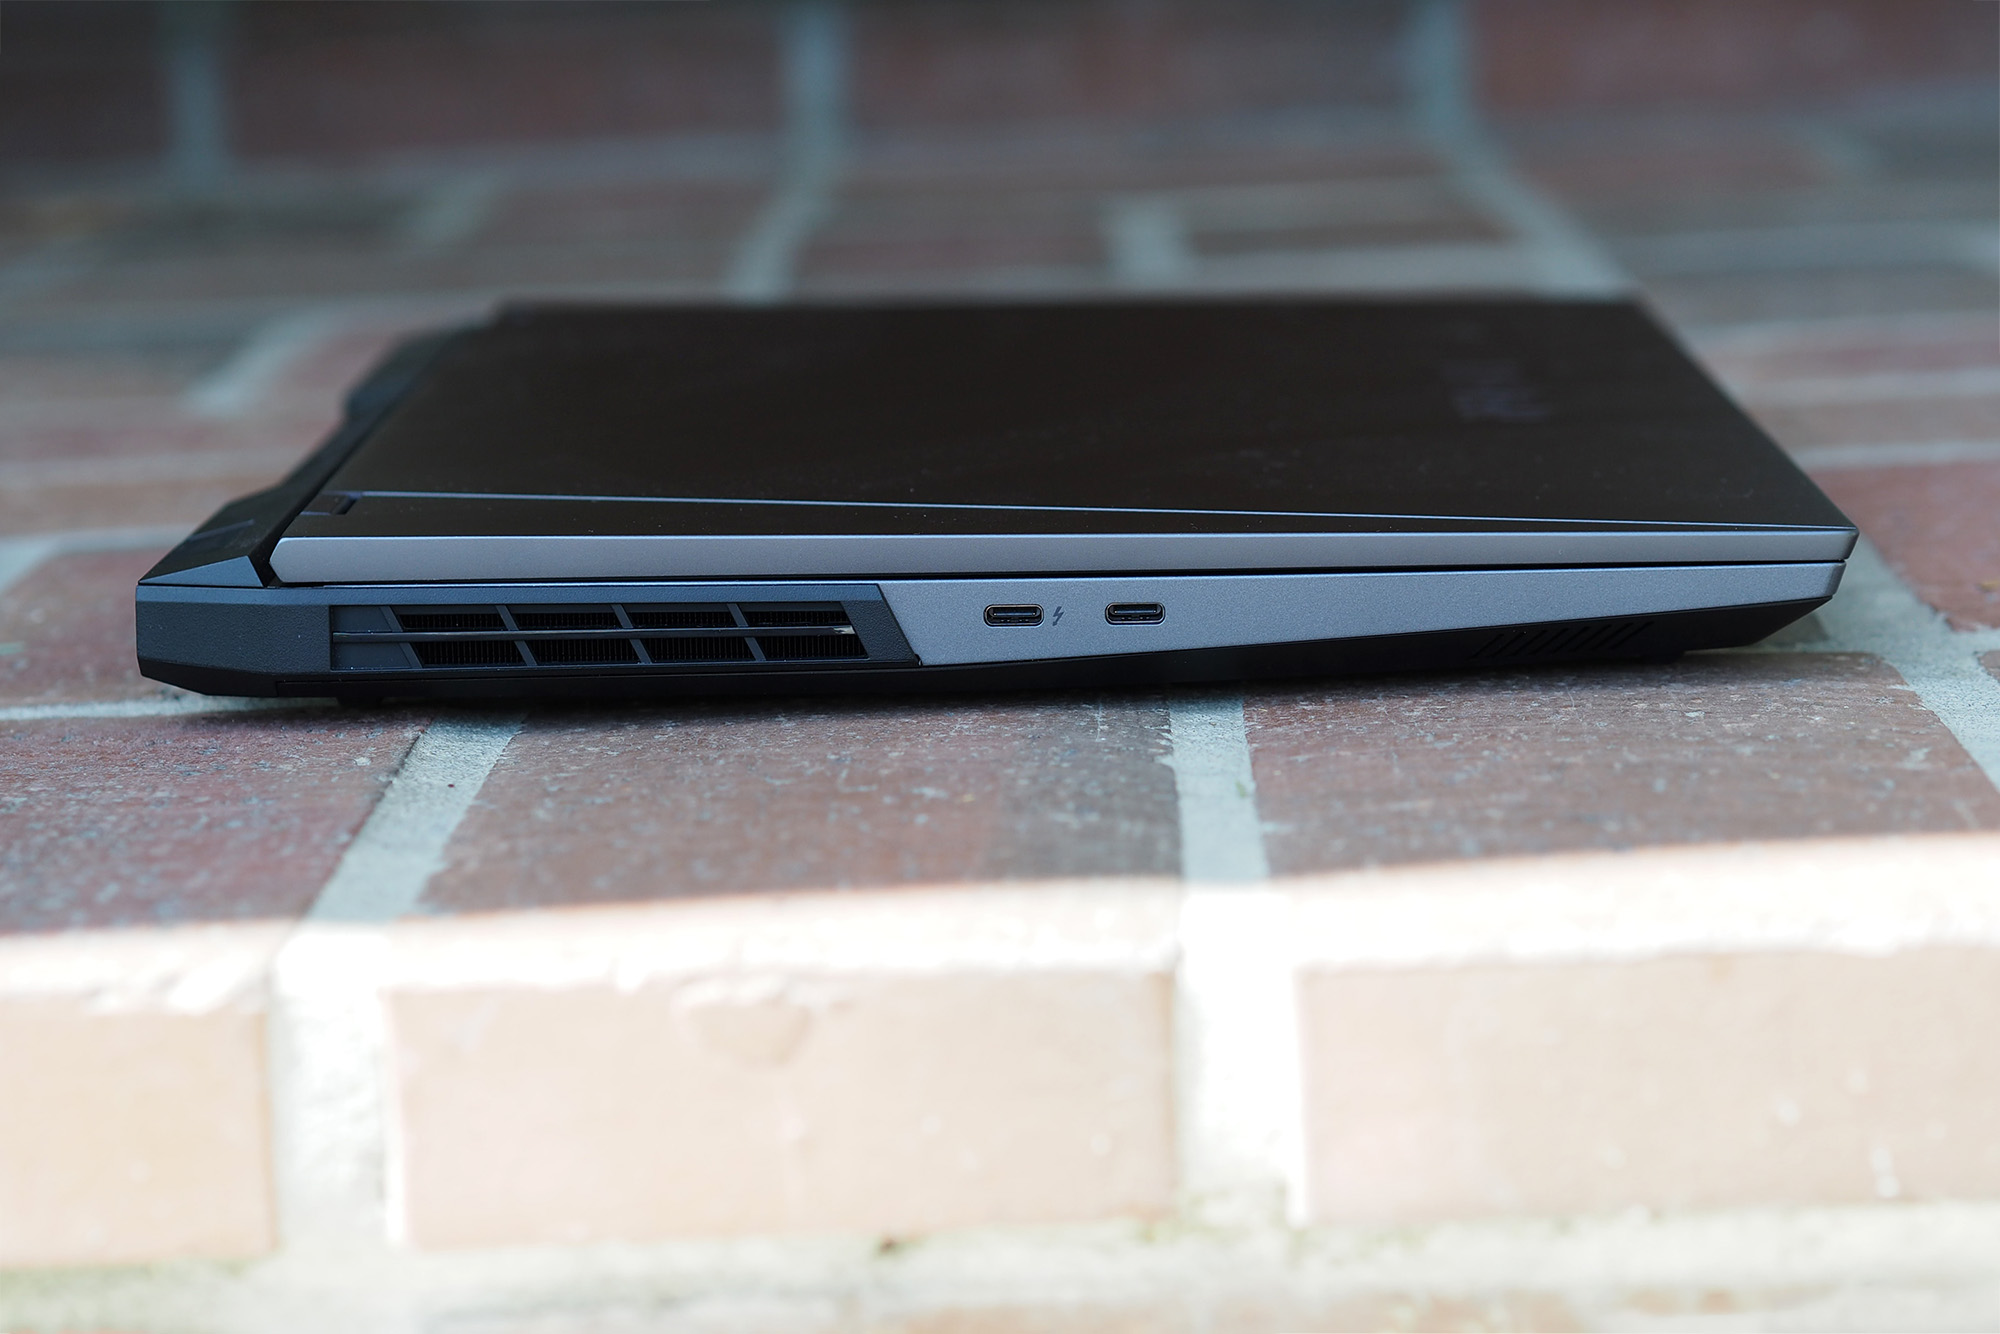 The left-hand side of the Lenovo Legion 5i Pro features a lightning USB-C port and another USB-C port.